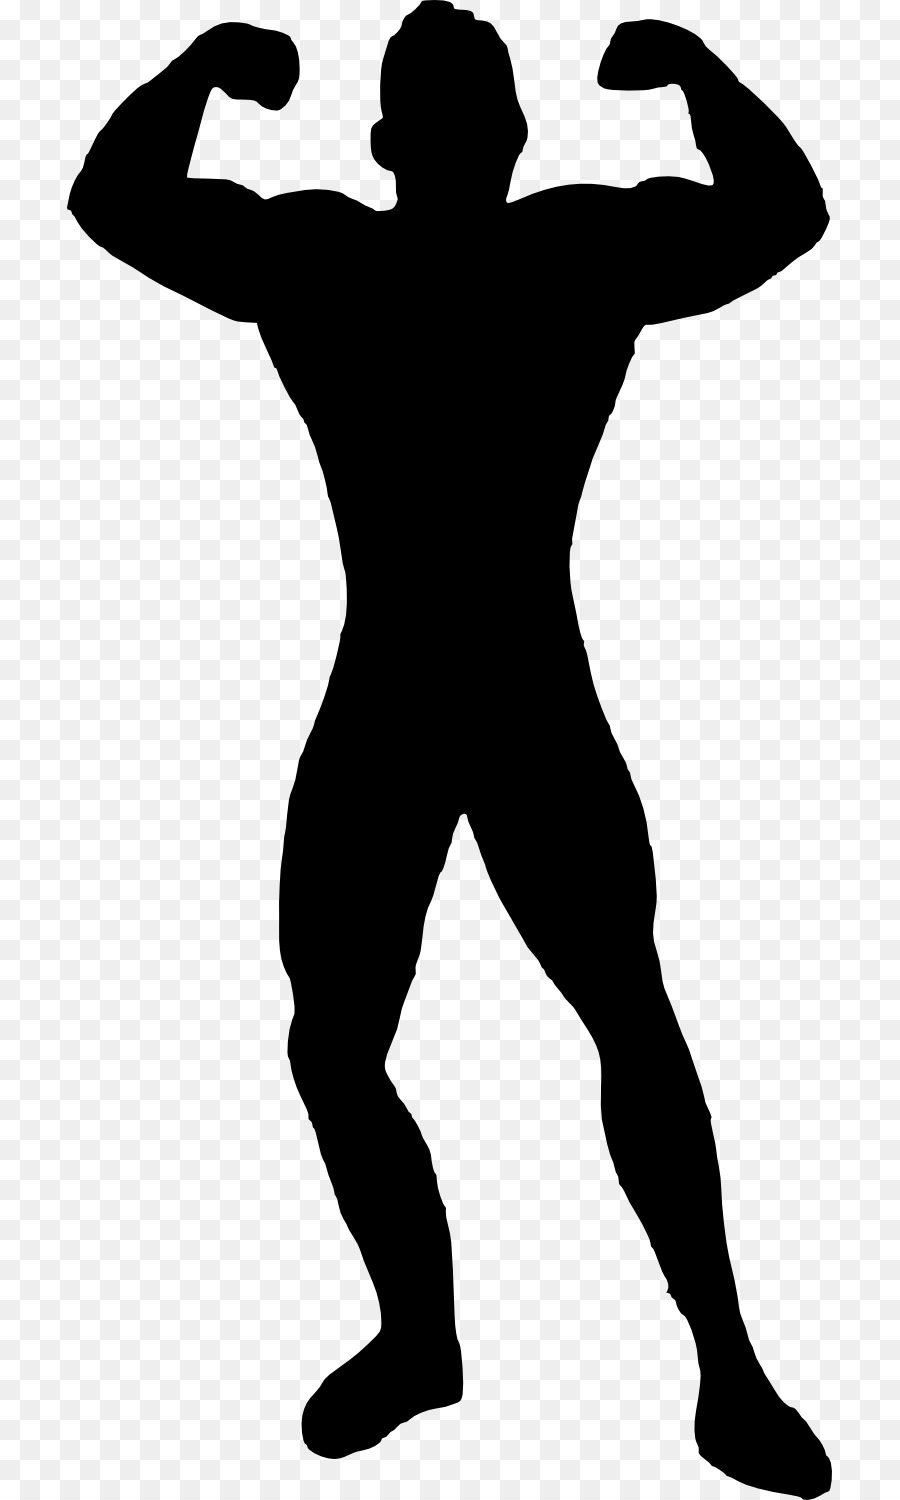 Silhouette Deadpool Muscle - muscle png download - 765*1500 - Free Transparent Silhouette png Download.